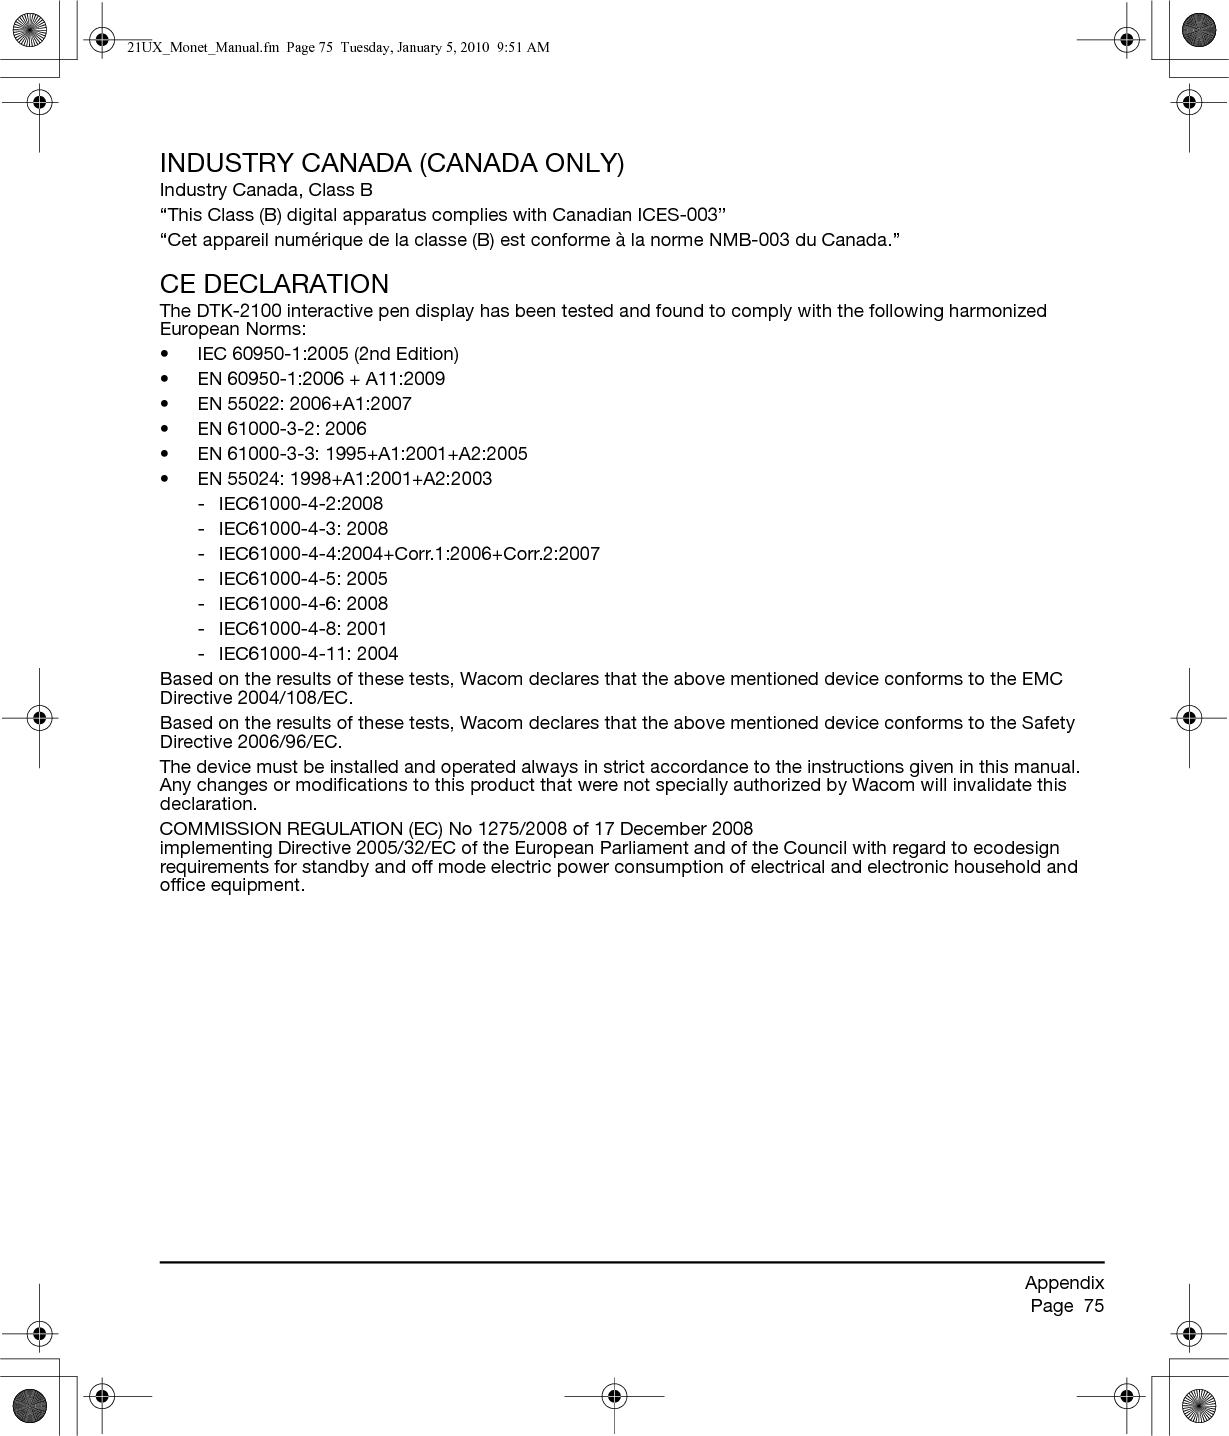 AppendixPage  75INDUSTRY CANADA (CANADA ONLY)Industry Canada, Class B“This Class (B) digital apparatus complies with Canadian ICES-003”“Cet appareil numérique de la classe (B) est conforme à la norme NMB-003 du Canada.”CE DECLARATIONThe DTK-2100 interactive pen display has been tested and found to comply with the following harmonized European Norms:• IEC 60950-1:2005 (2nd Edition)• EN 60950-1:2006 + A11:2009• EN 55022: 2006+A1:2007• EN 61000-3-2: 2006• EN 61000-3-3: 1995+A1:2001+A2:2005• EN 55024: 1998+A1:2001+A2:2003- IEC61000-4-2:2008- IEC61000-4-3: 2008- IEC61000-4-4:2004+Corr.1:2006+Corr.2:2007- IEC61000-4-5: 2005- IEC61000-4-6: 2008- IEC61000-4-8: 2001- IEC61000-4-11: 2004Based on the results of these tests, Wacom declares that the above mentioned device conforms to the EMC Directive 2004/108/EC.Based on the results of these tests, Wacom declares that the above mentioned device conforms to the Safety Directive 2006/96/EC.The device must be installed and operated always in strict accordance to the instructions given in this manual. Any changes or modifications to this product that were not specially authorized by Wacom will invalidate this declaration.COMMISSION REGULATION (EC) No 1275/2008 of 17 December 2008 implementing Directive 2005/32/EC of the European Parliament and of the Council with regard to ecodesign requirements for standby and off mode electric power consumption of electrical and electronic household and office equipment.21UX_Monet_Manual.fm  Page 75  Tuesday, January 5, 2010  9:51 AM